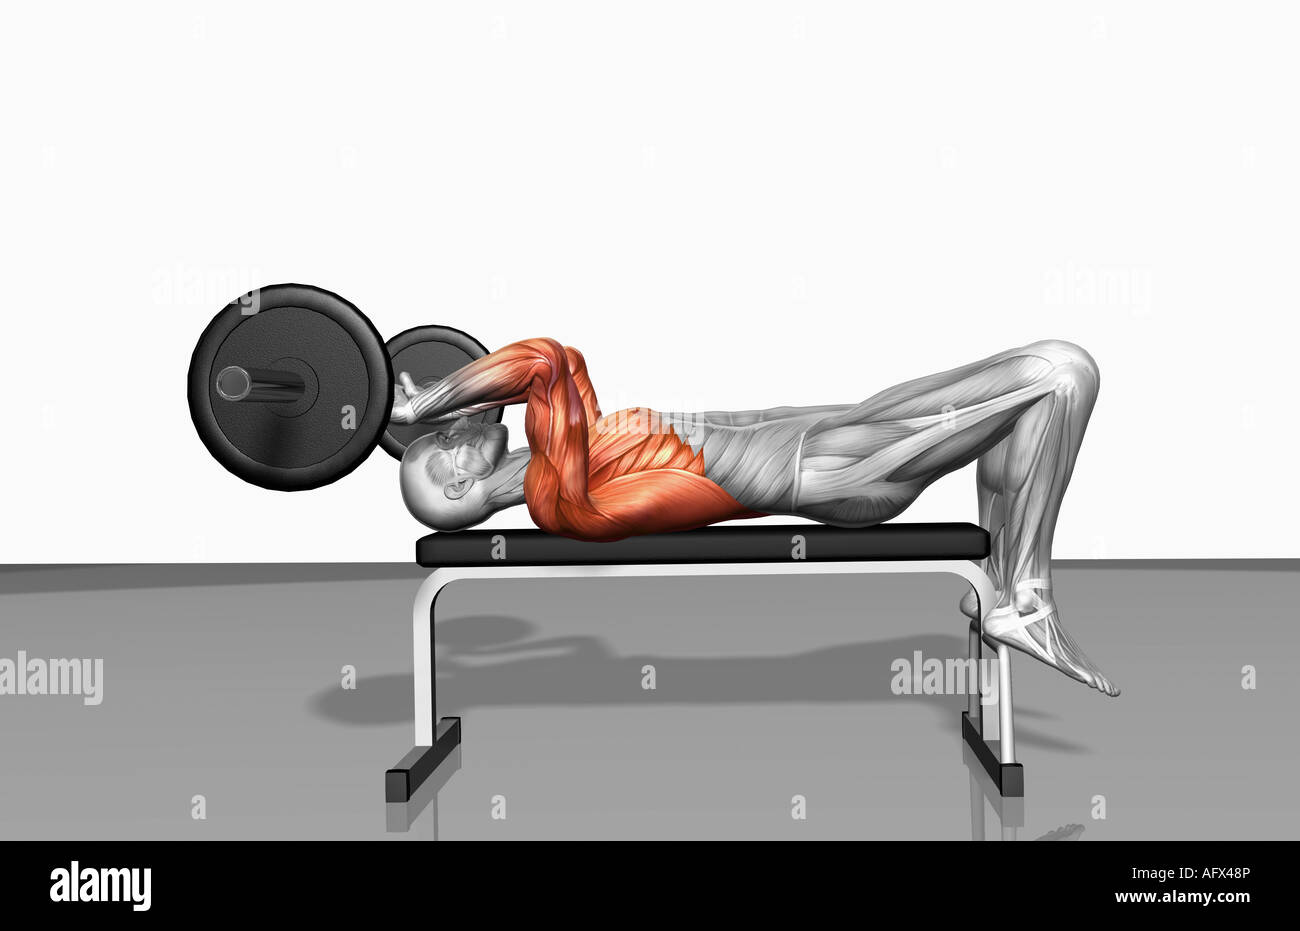 Overhead barbell triceps extension (Part 2 of 2 Stock Photo - Alamy